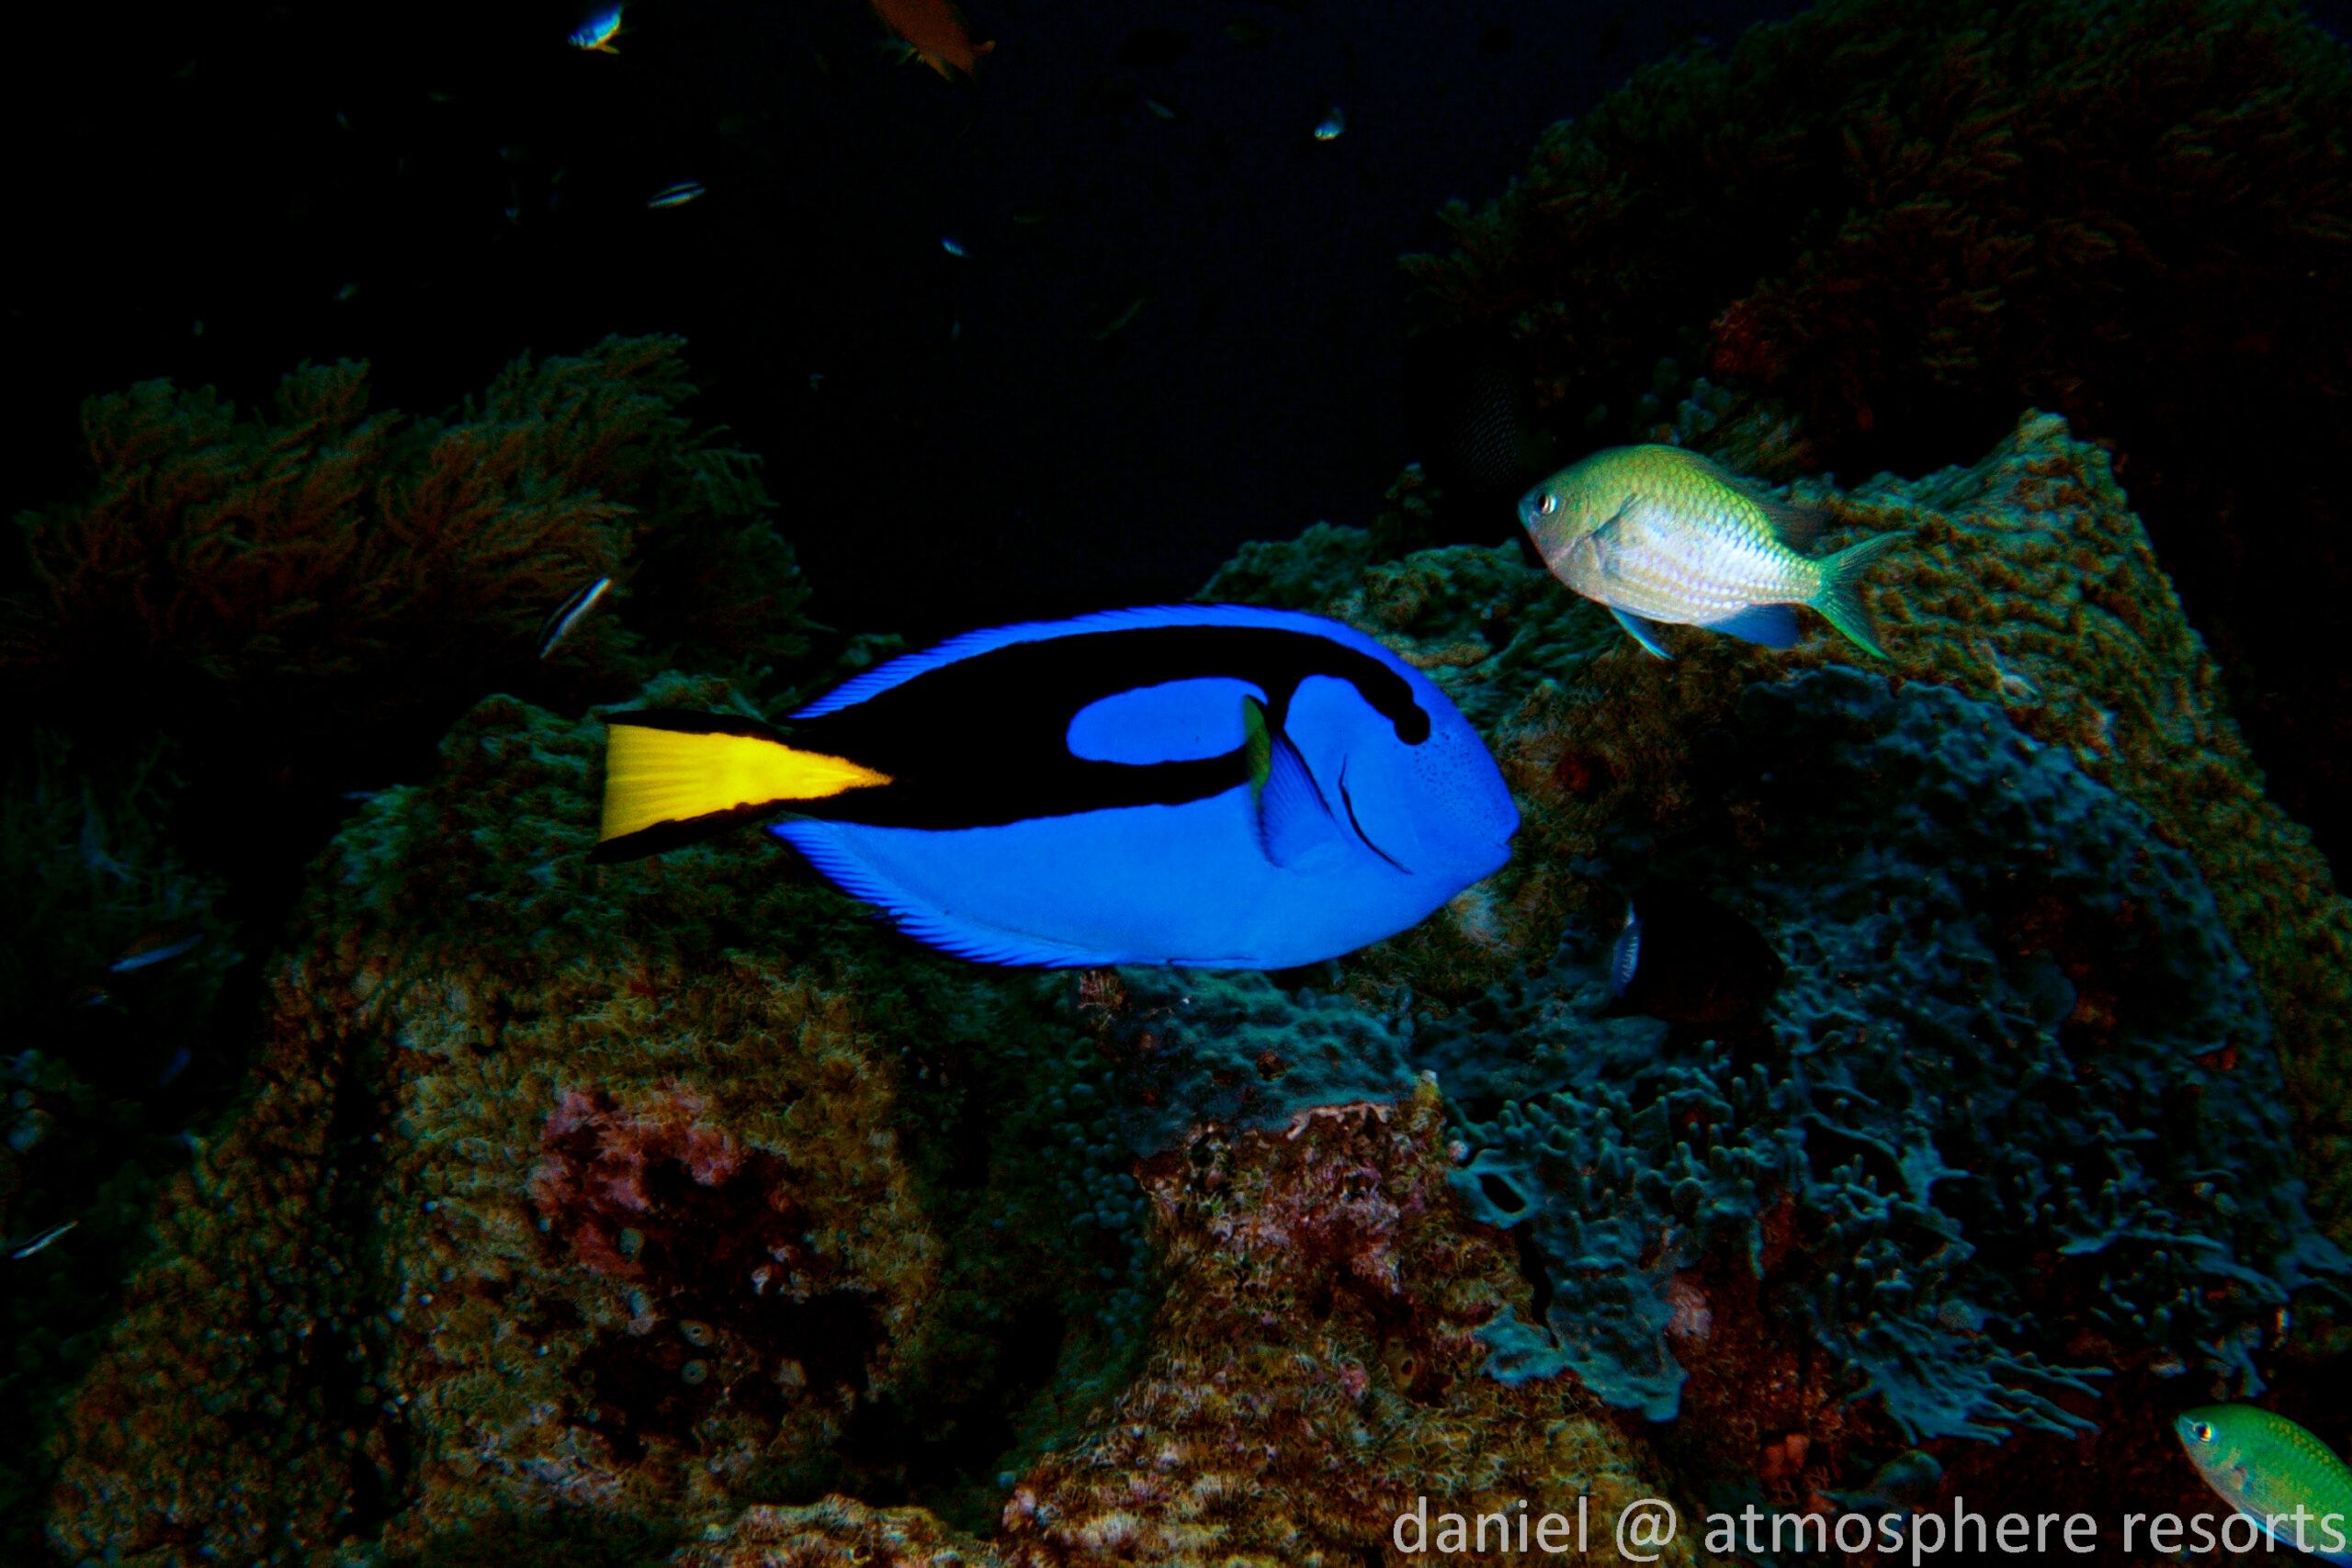 Dory - surgeonfish - blue tang - beloved child has many names. this one from Atmosphere Resort in the Philippines